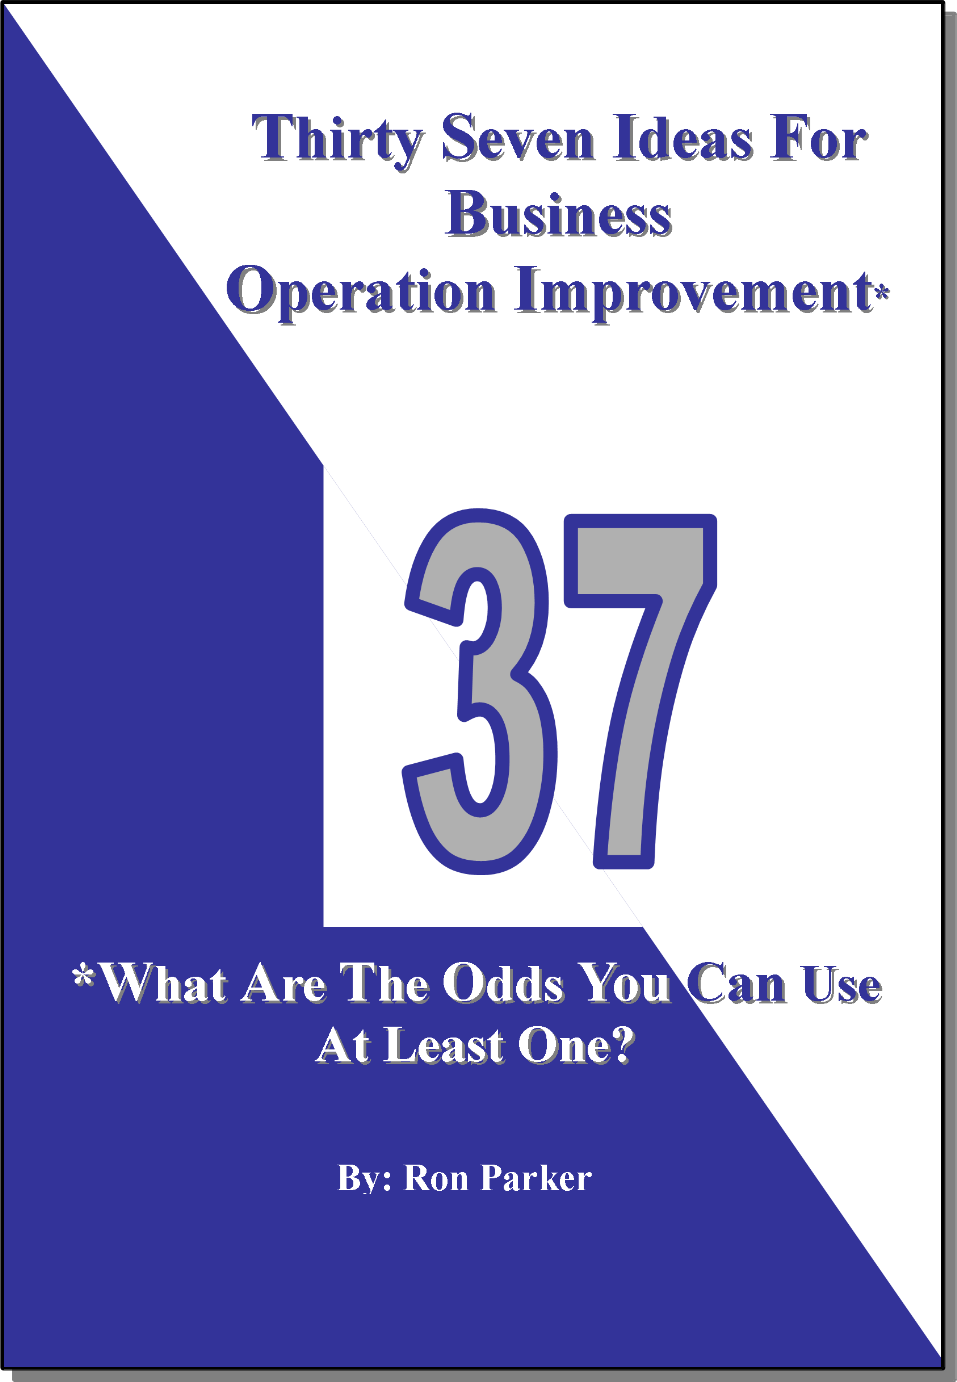 Thirty Seven Ideas For Business Operation Improvement*